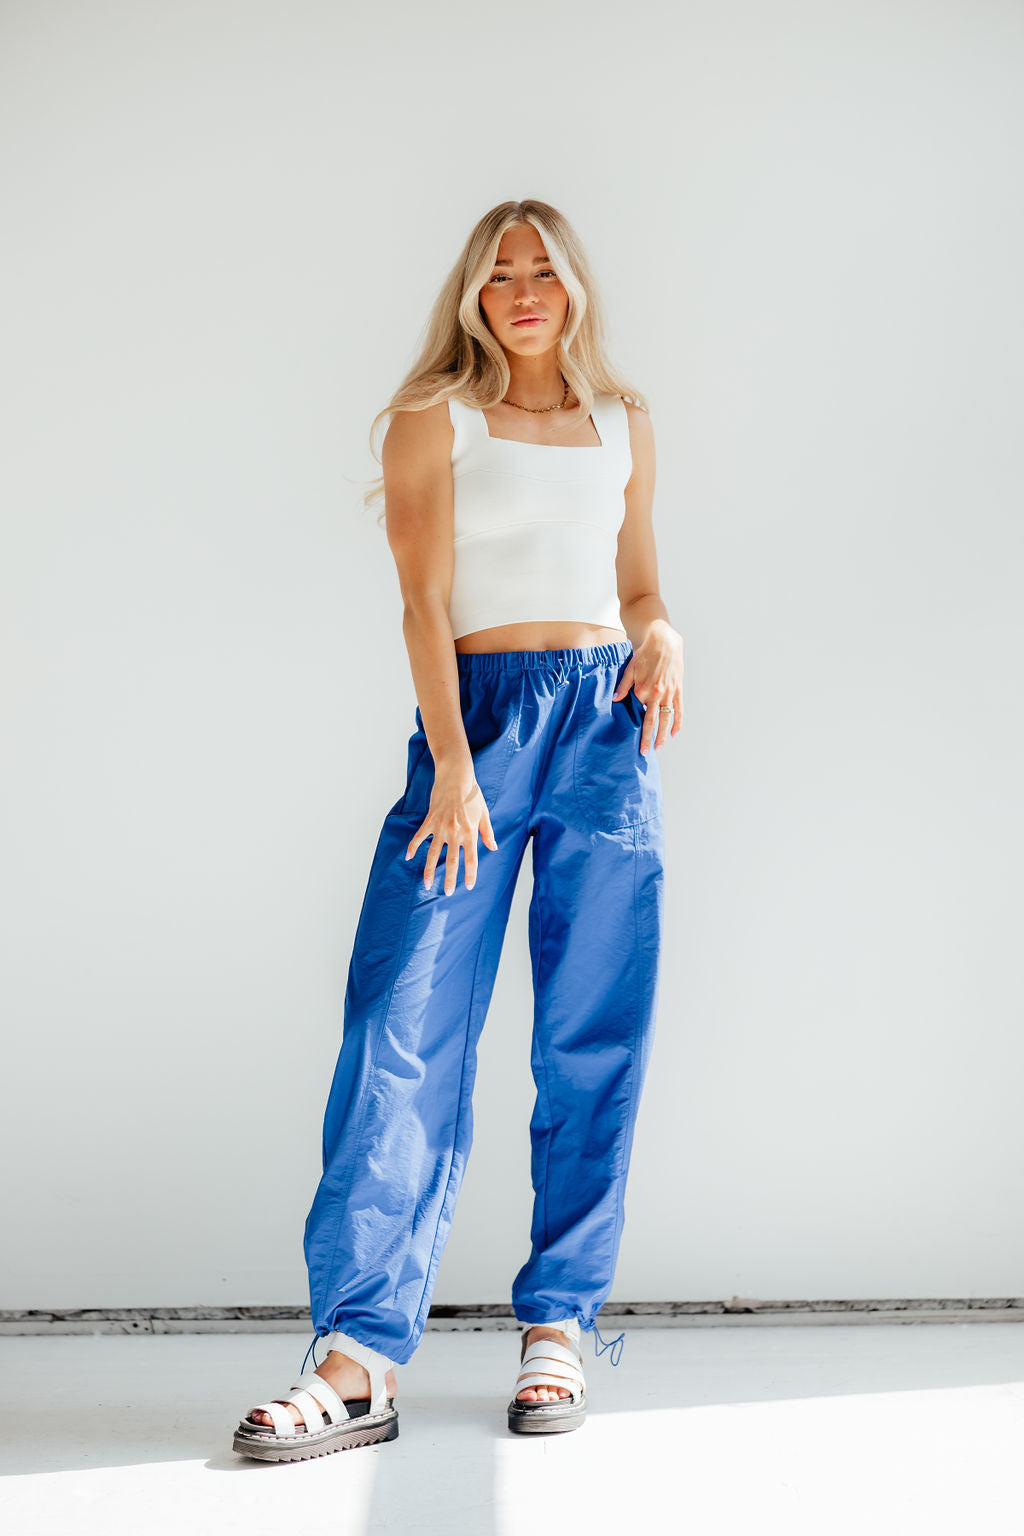 Unionbay Sweatpants Can Be Styled for Fancier Occasions | Us Weekly